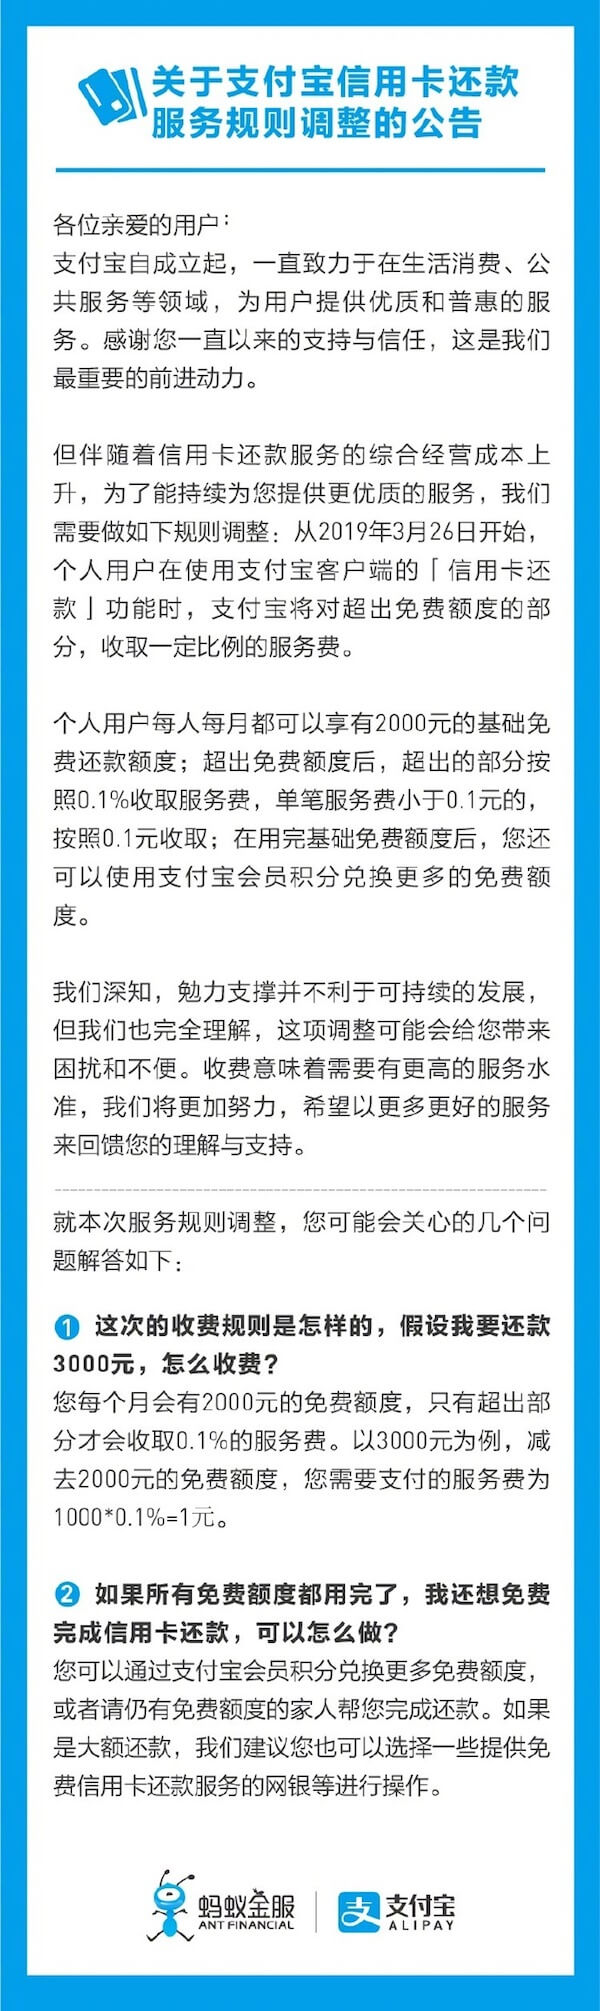 Alipay announcement on Weibo